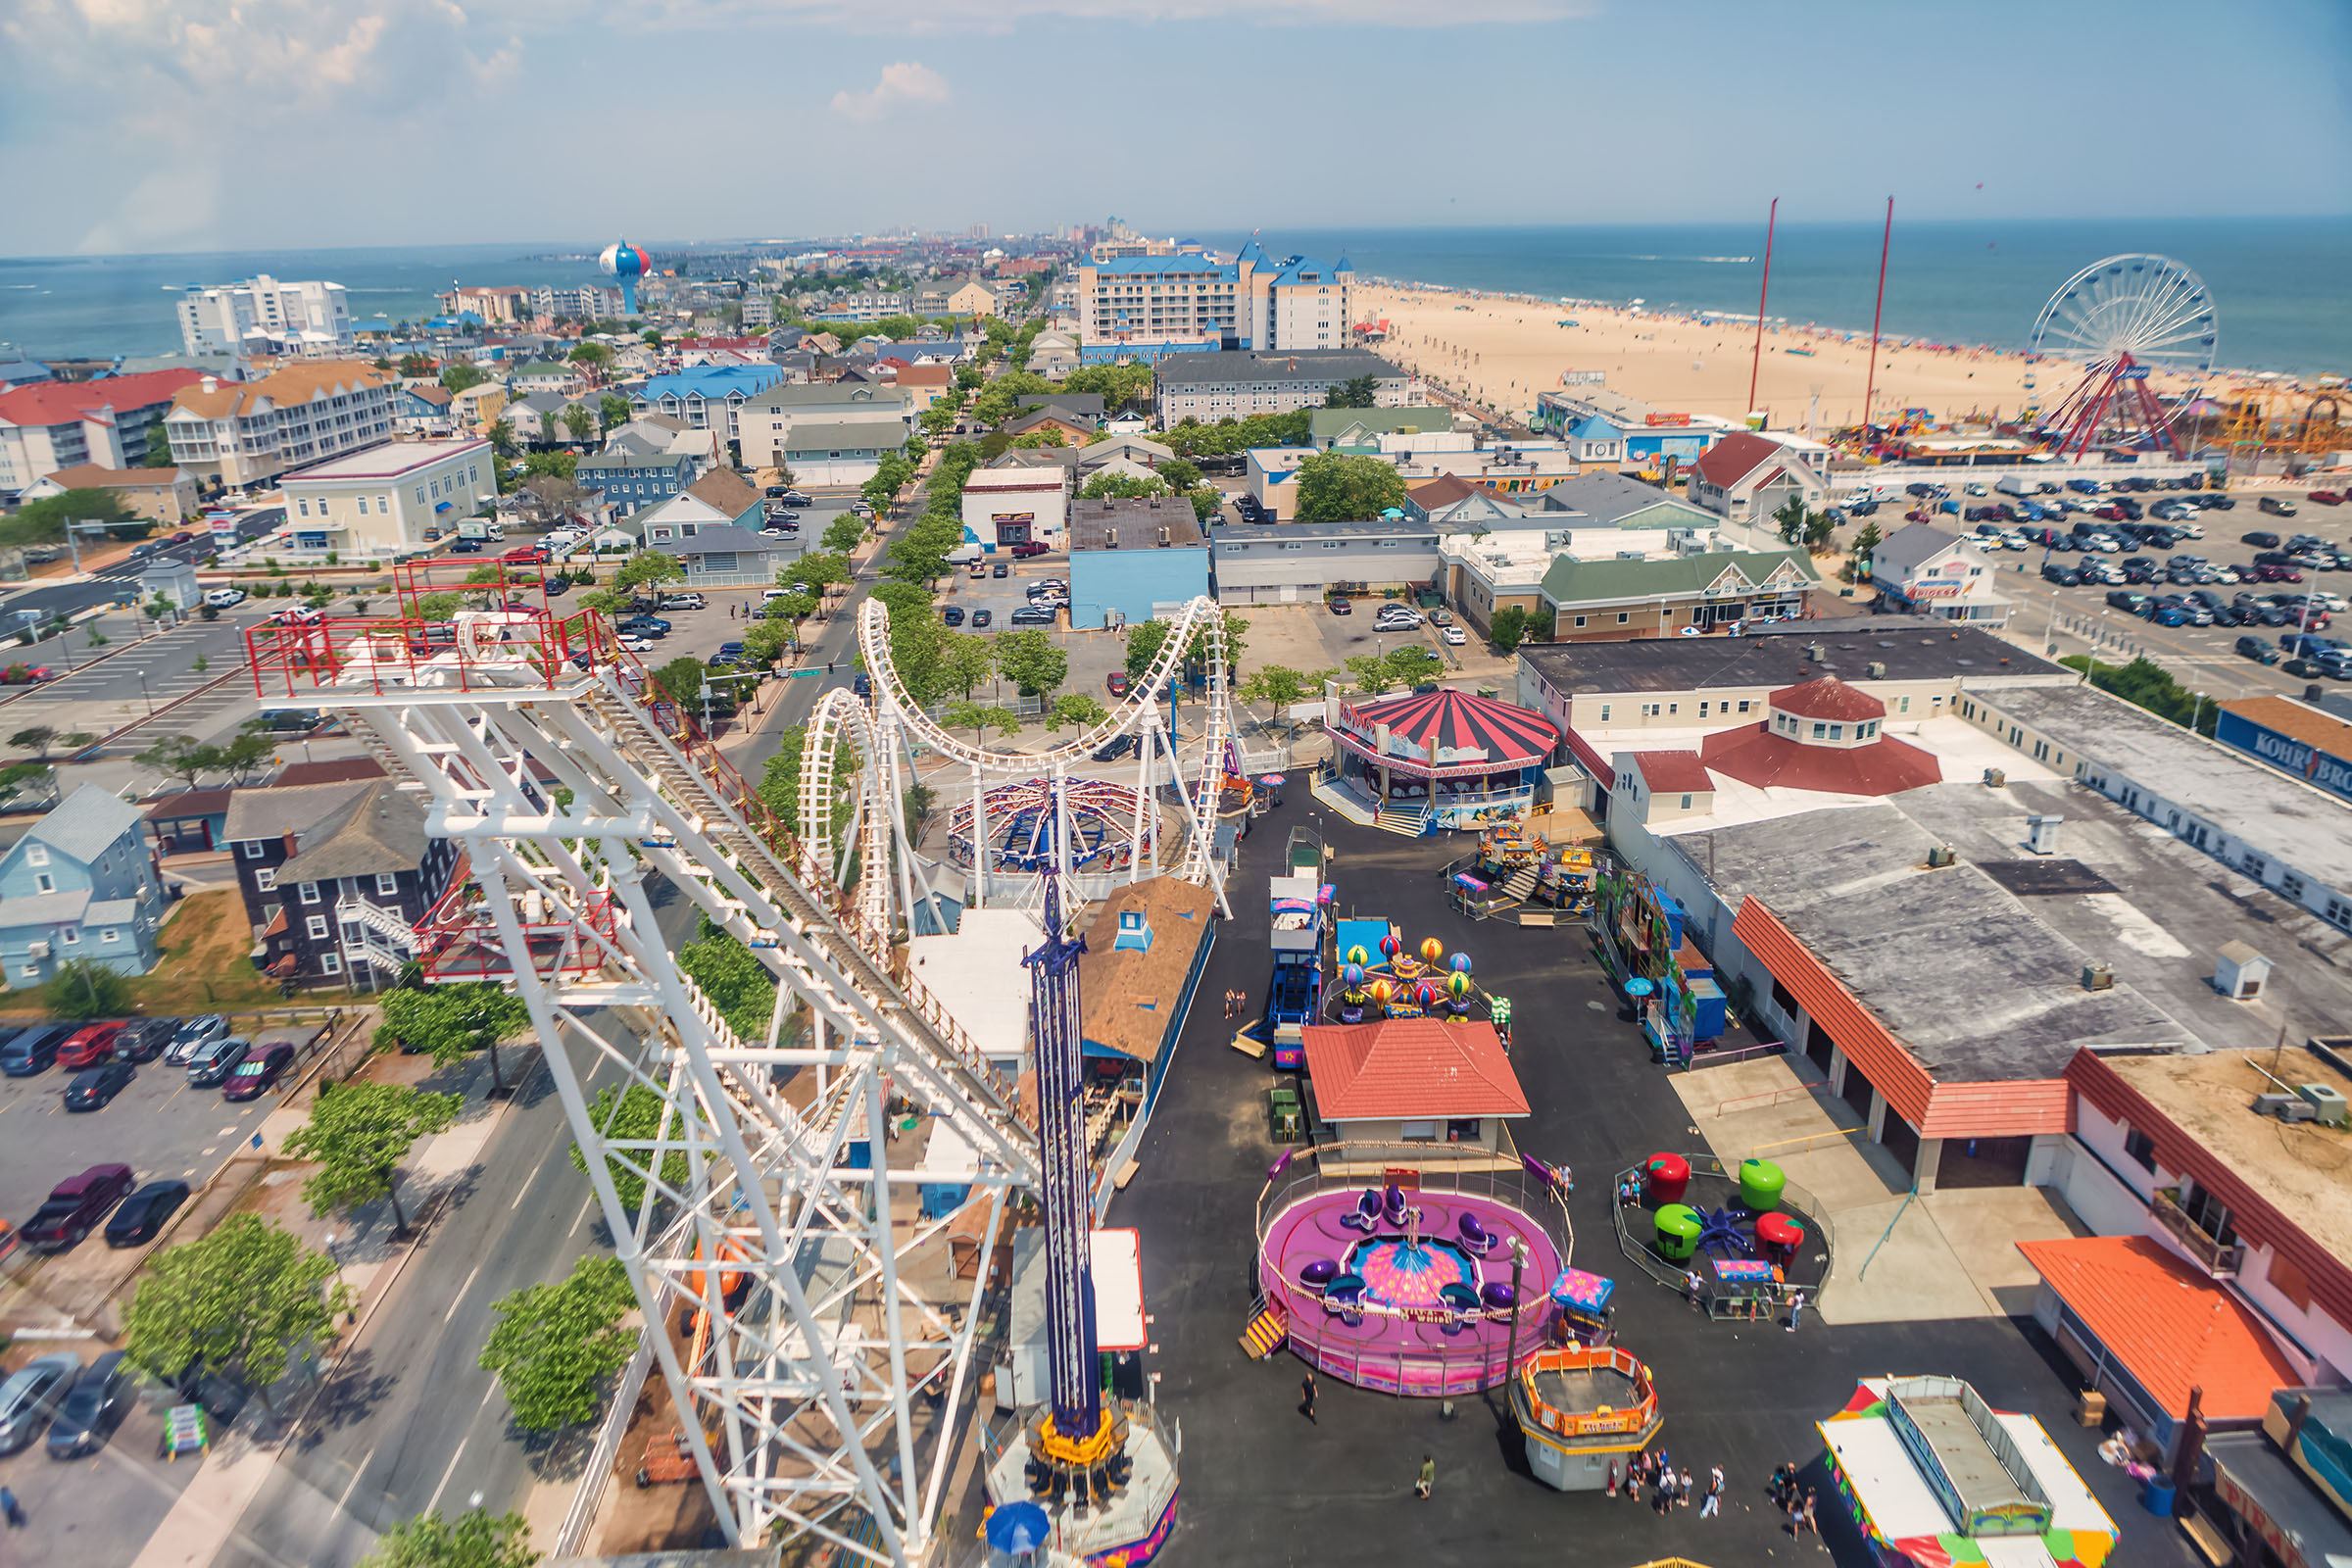 08/25/2020 2020 A Year Of Transition For Ocean City’s Trimper’s Rides